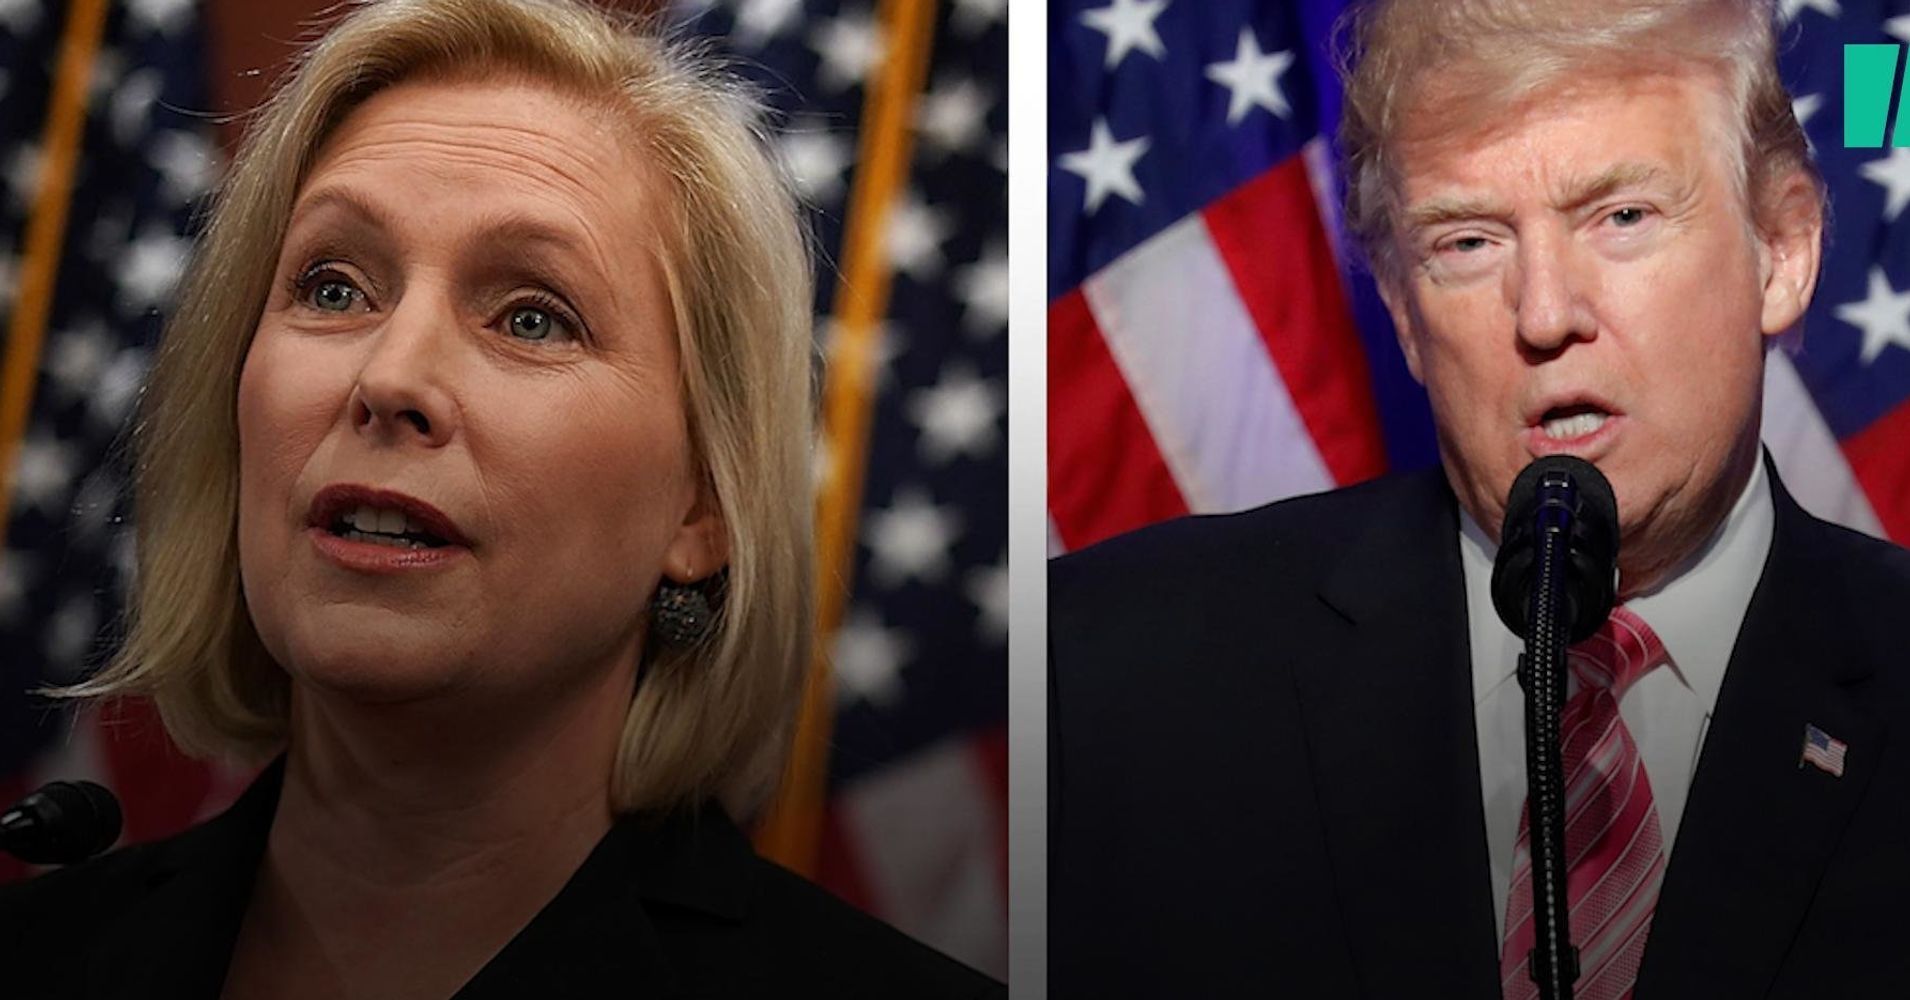 Sen. Gillibrand Refuses To Be Silenced By Trump's 'Sexist' Insult ...